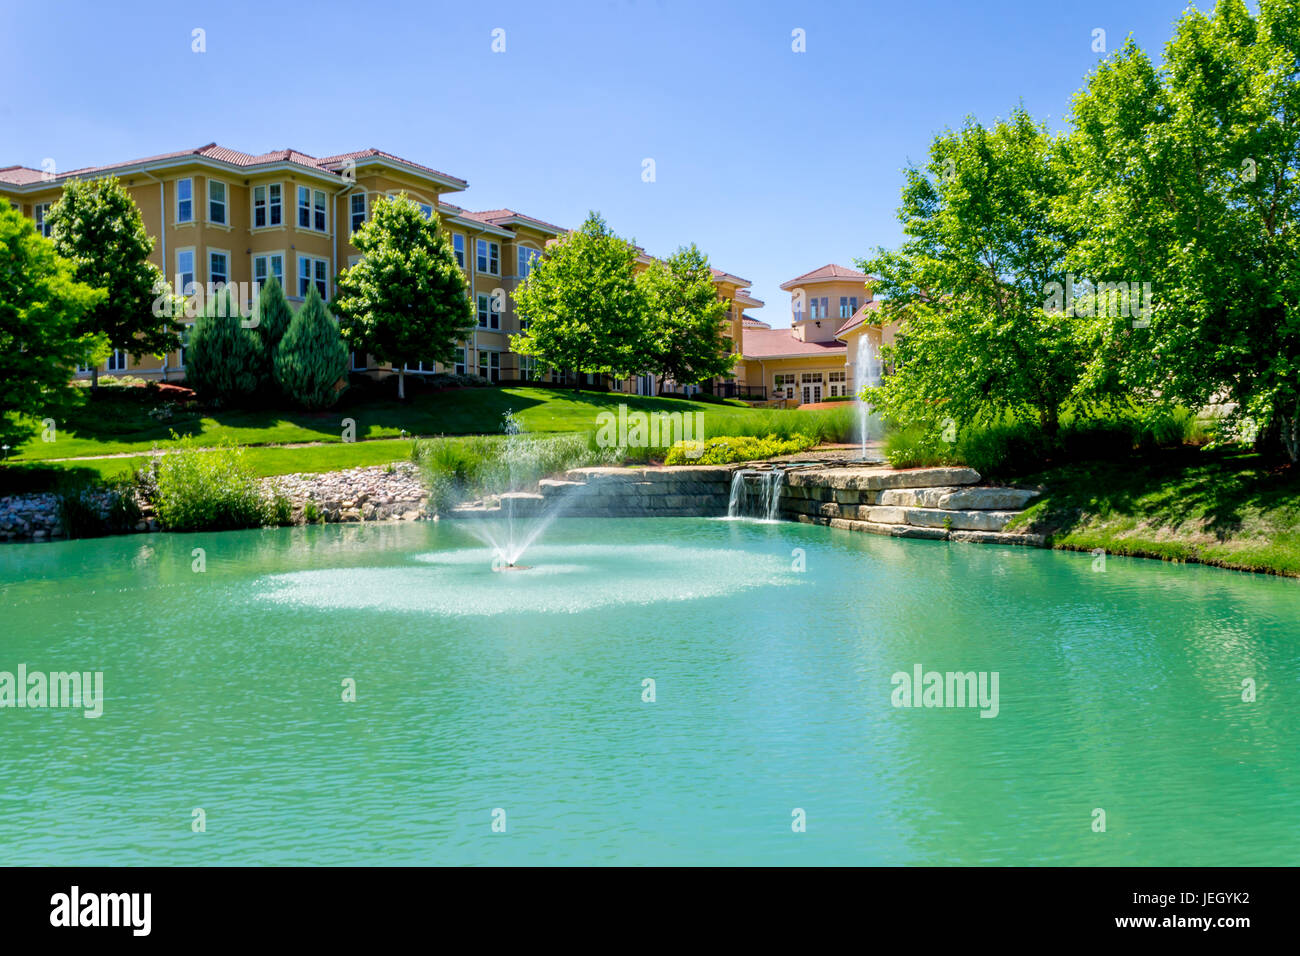 Beautiful waterfall fountain in front of Italian style building near park Stock Photo